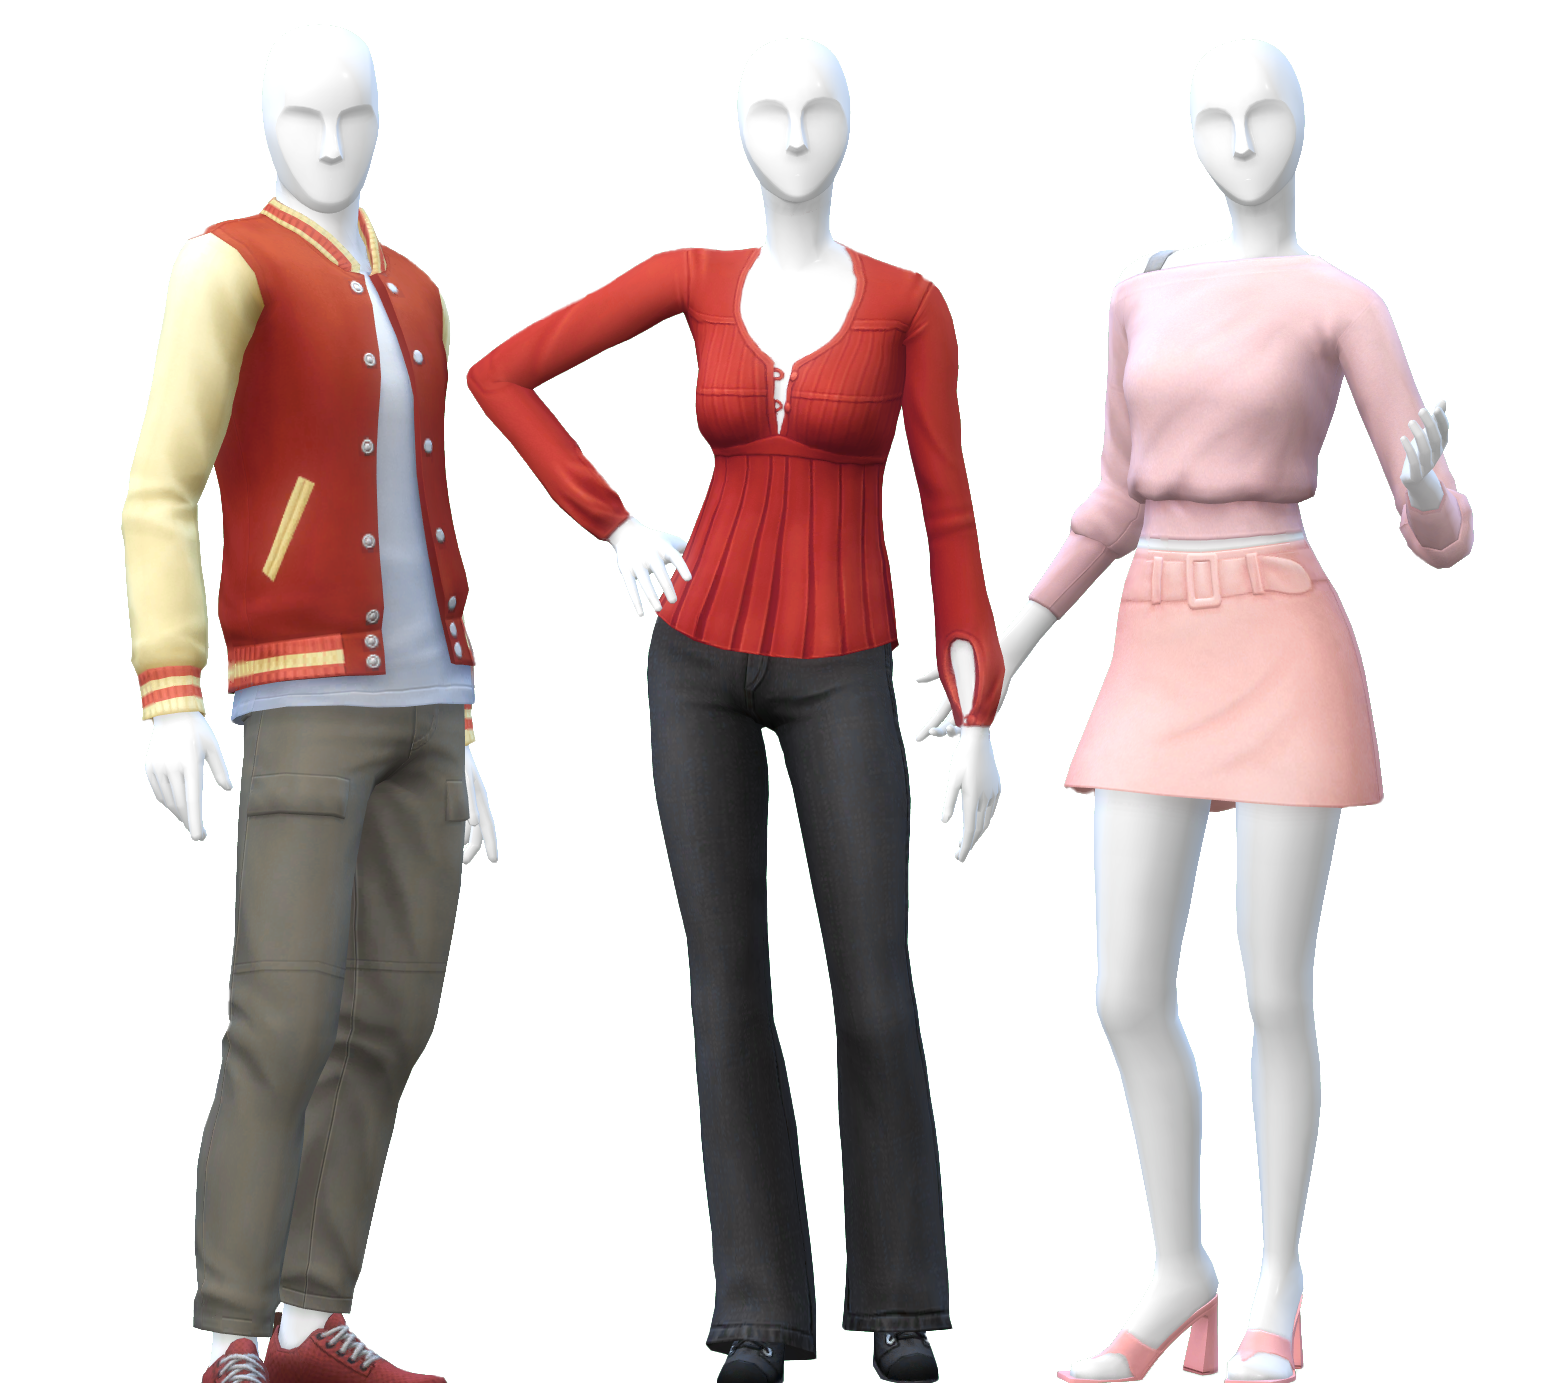 Free The Sims 4 Clothing Maxis Match CC : r/Sims4